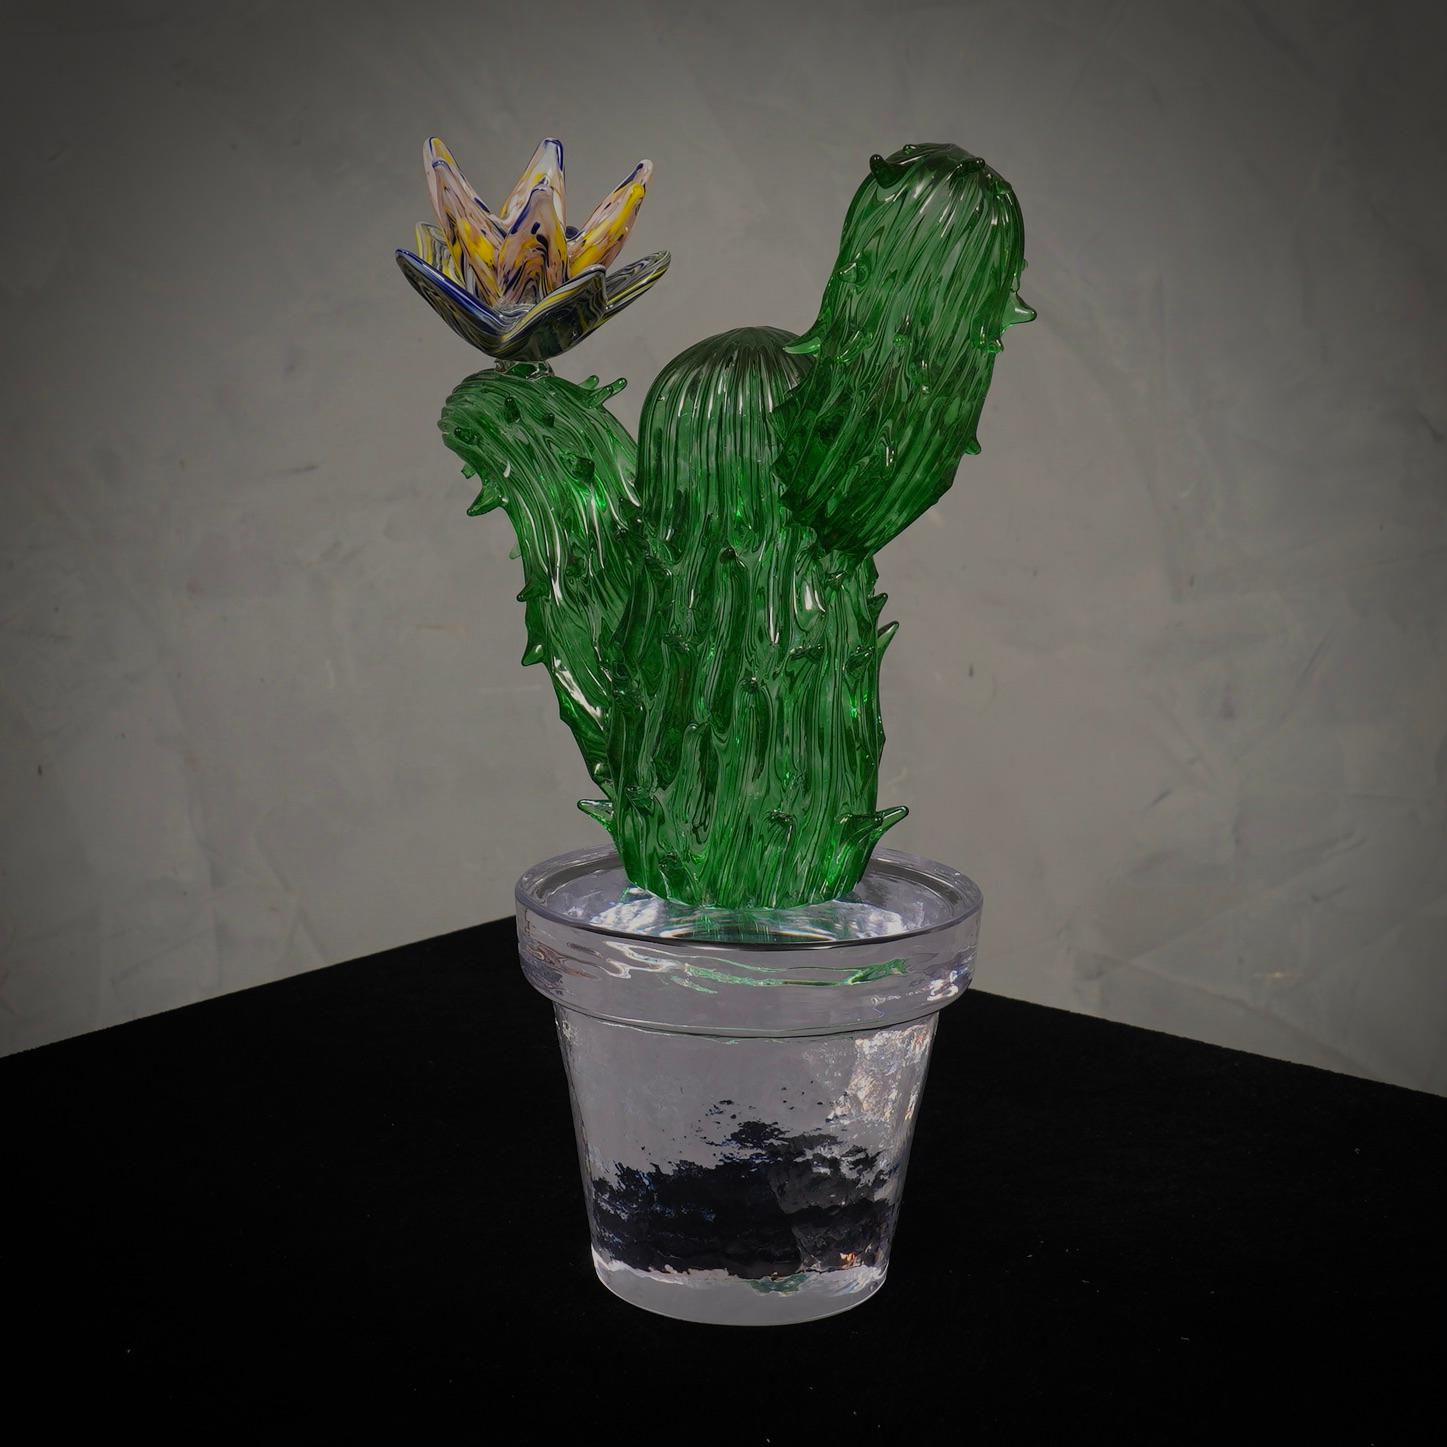 Italian design by Marta Marzotto creator of style, this cactus is a fashion icon of the Italian style, emerald green with a multi colored spot, the flower. Refinement and class as in Marta Marzotto's style, one-of-a-kind pieces that always remain